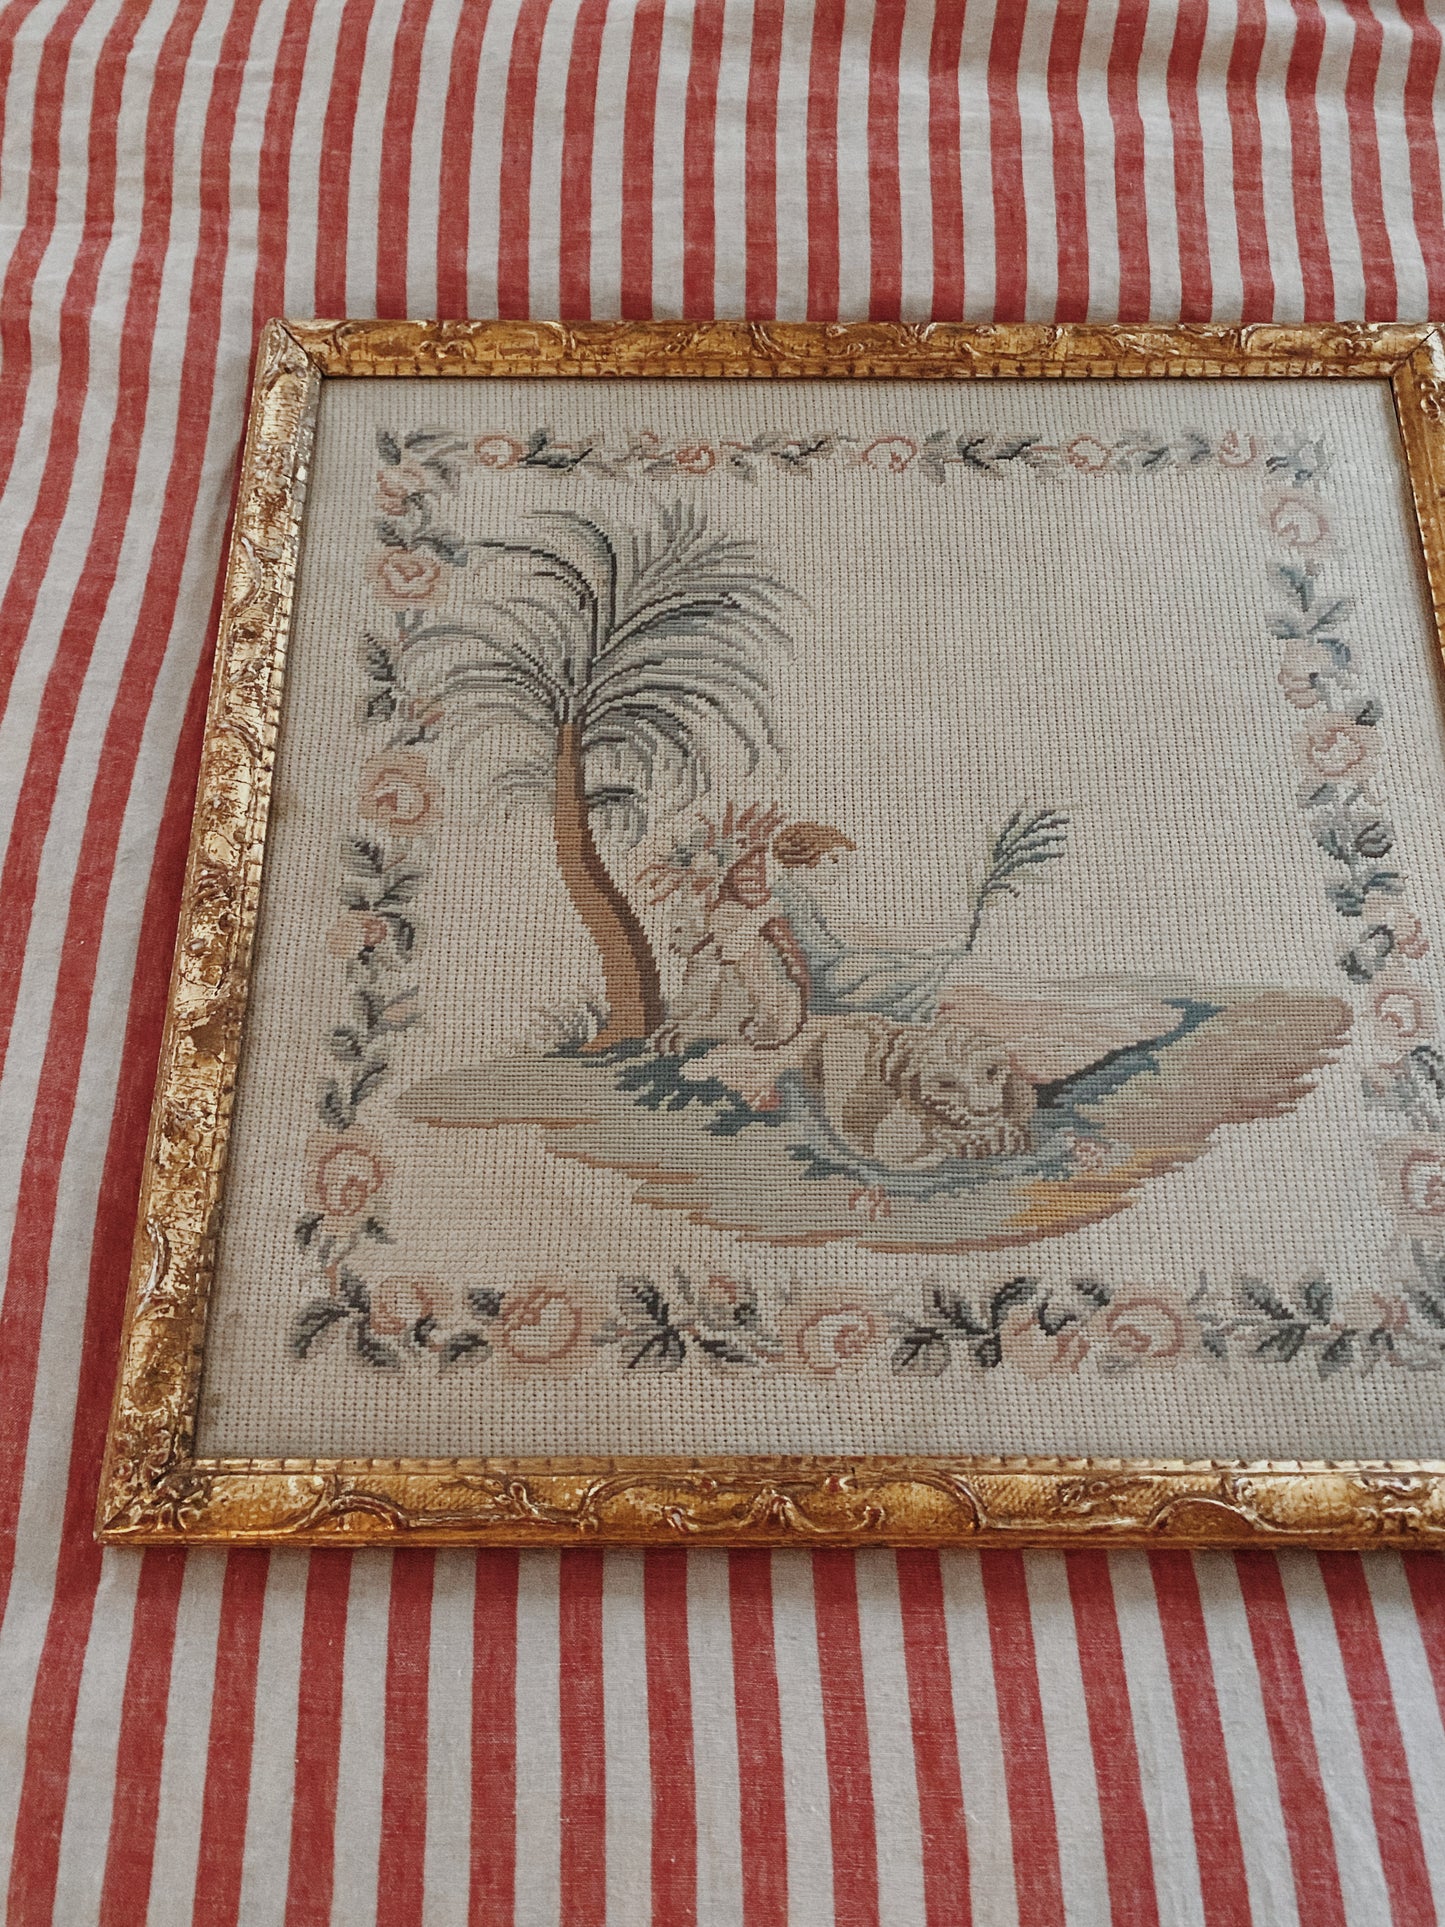 Vintage Needlepoint Tapestry in French Style Gilded Frame- 21x22”